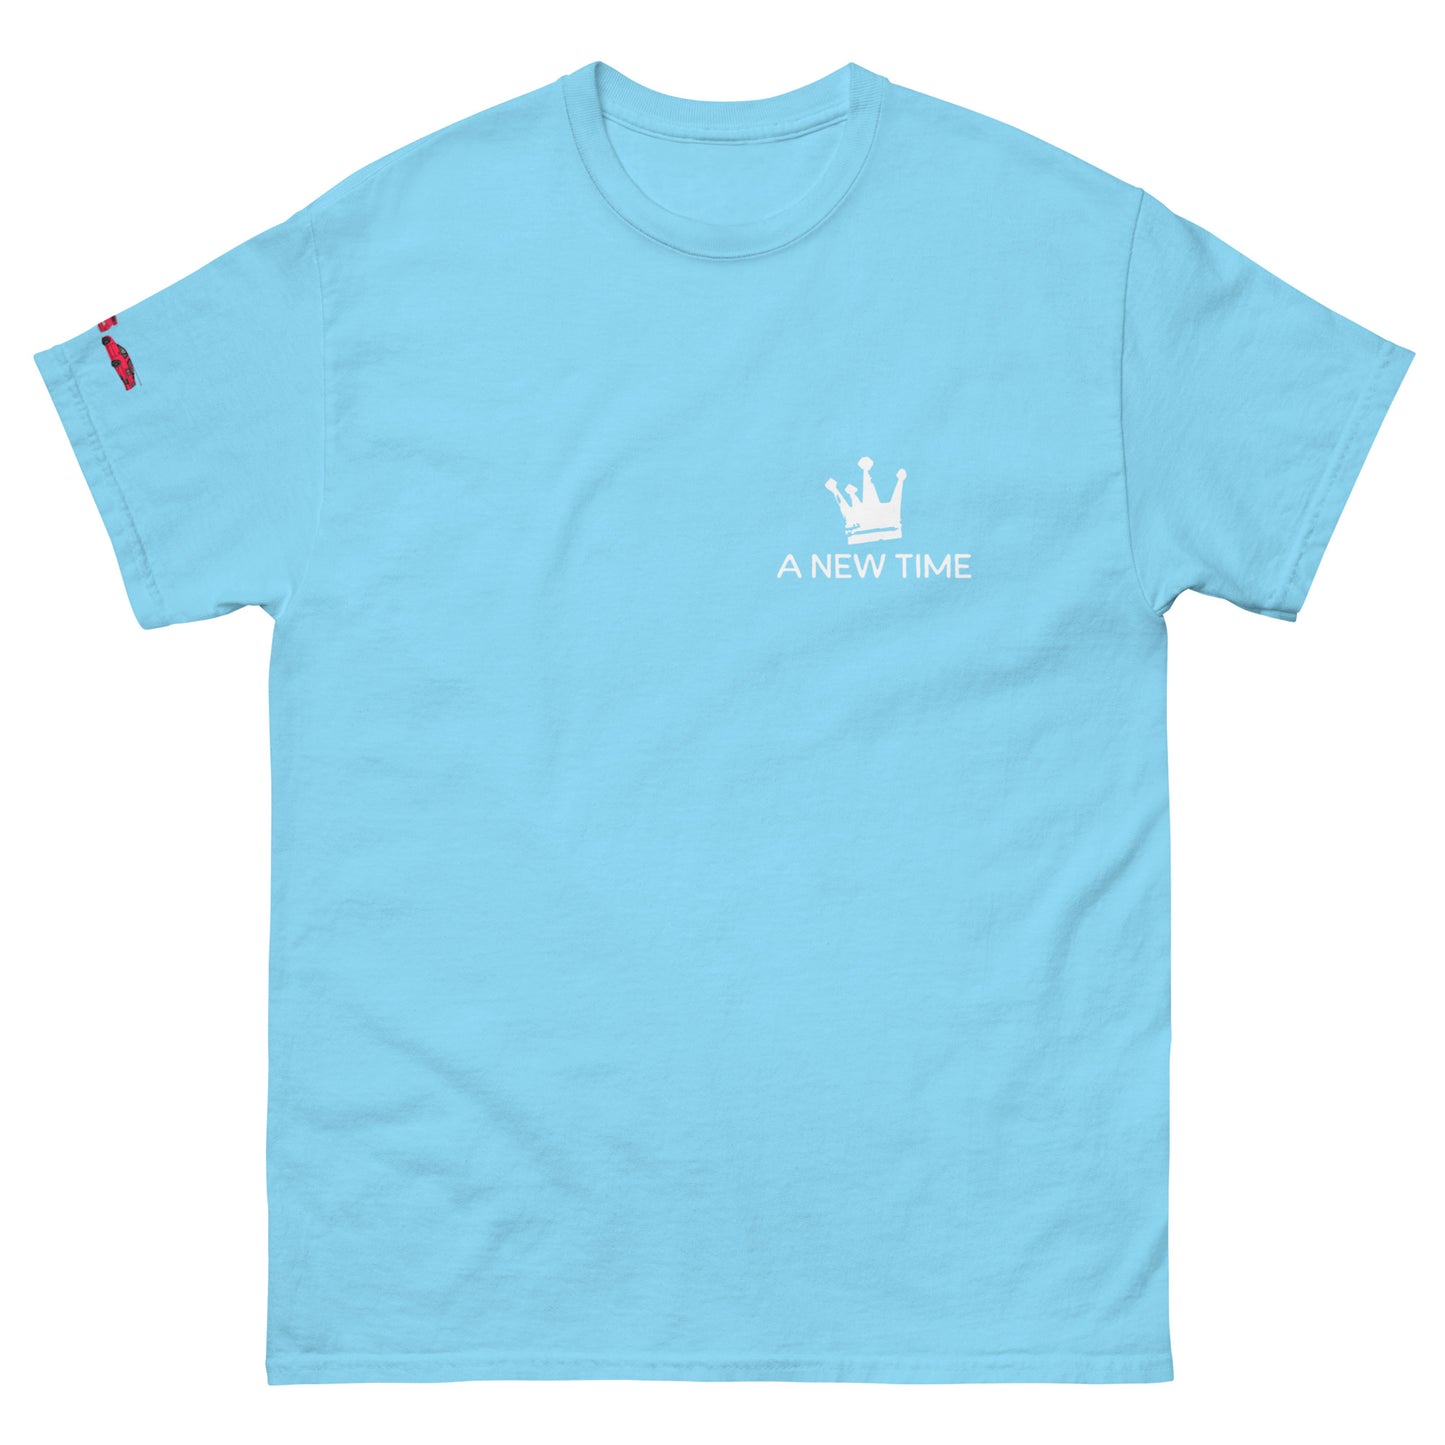 Skyline T-shirt (Part of Deluxe Cars Collections)